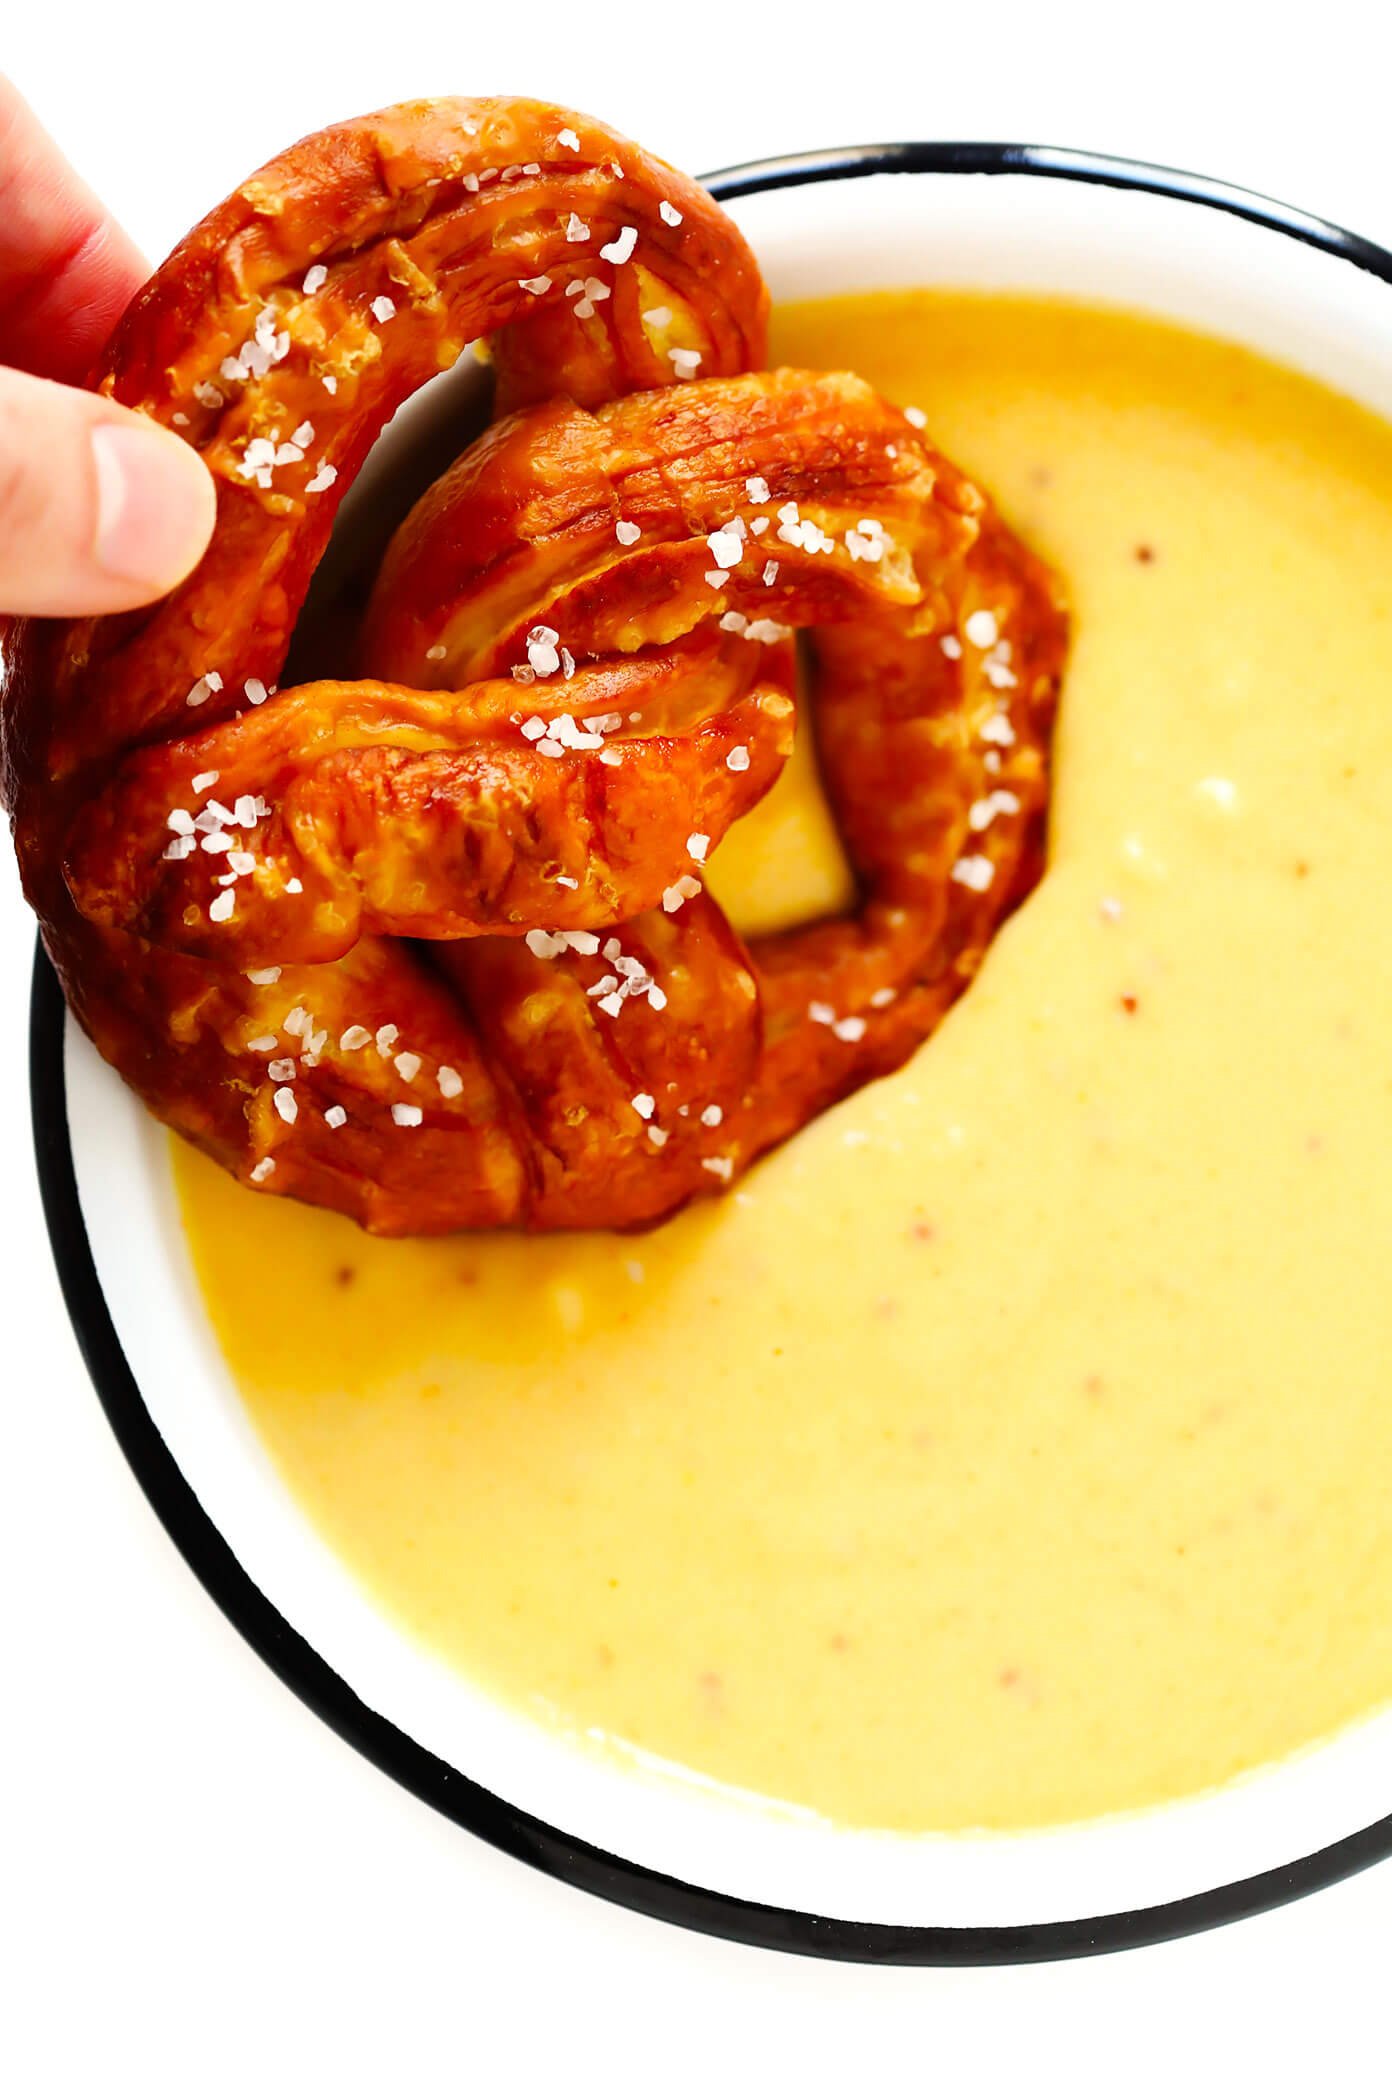 Homemade Soft Pretzels with Beer Cheese Dip